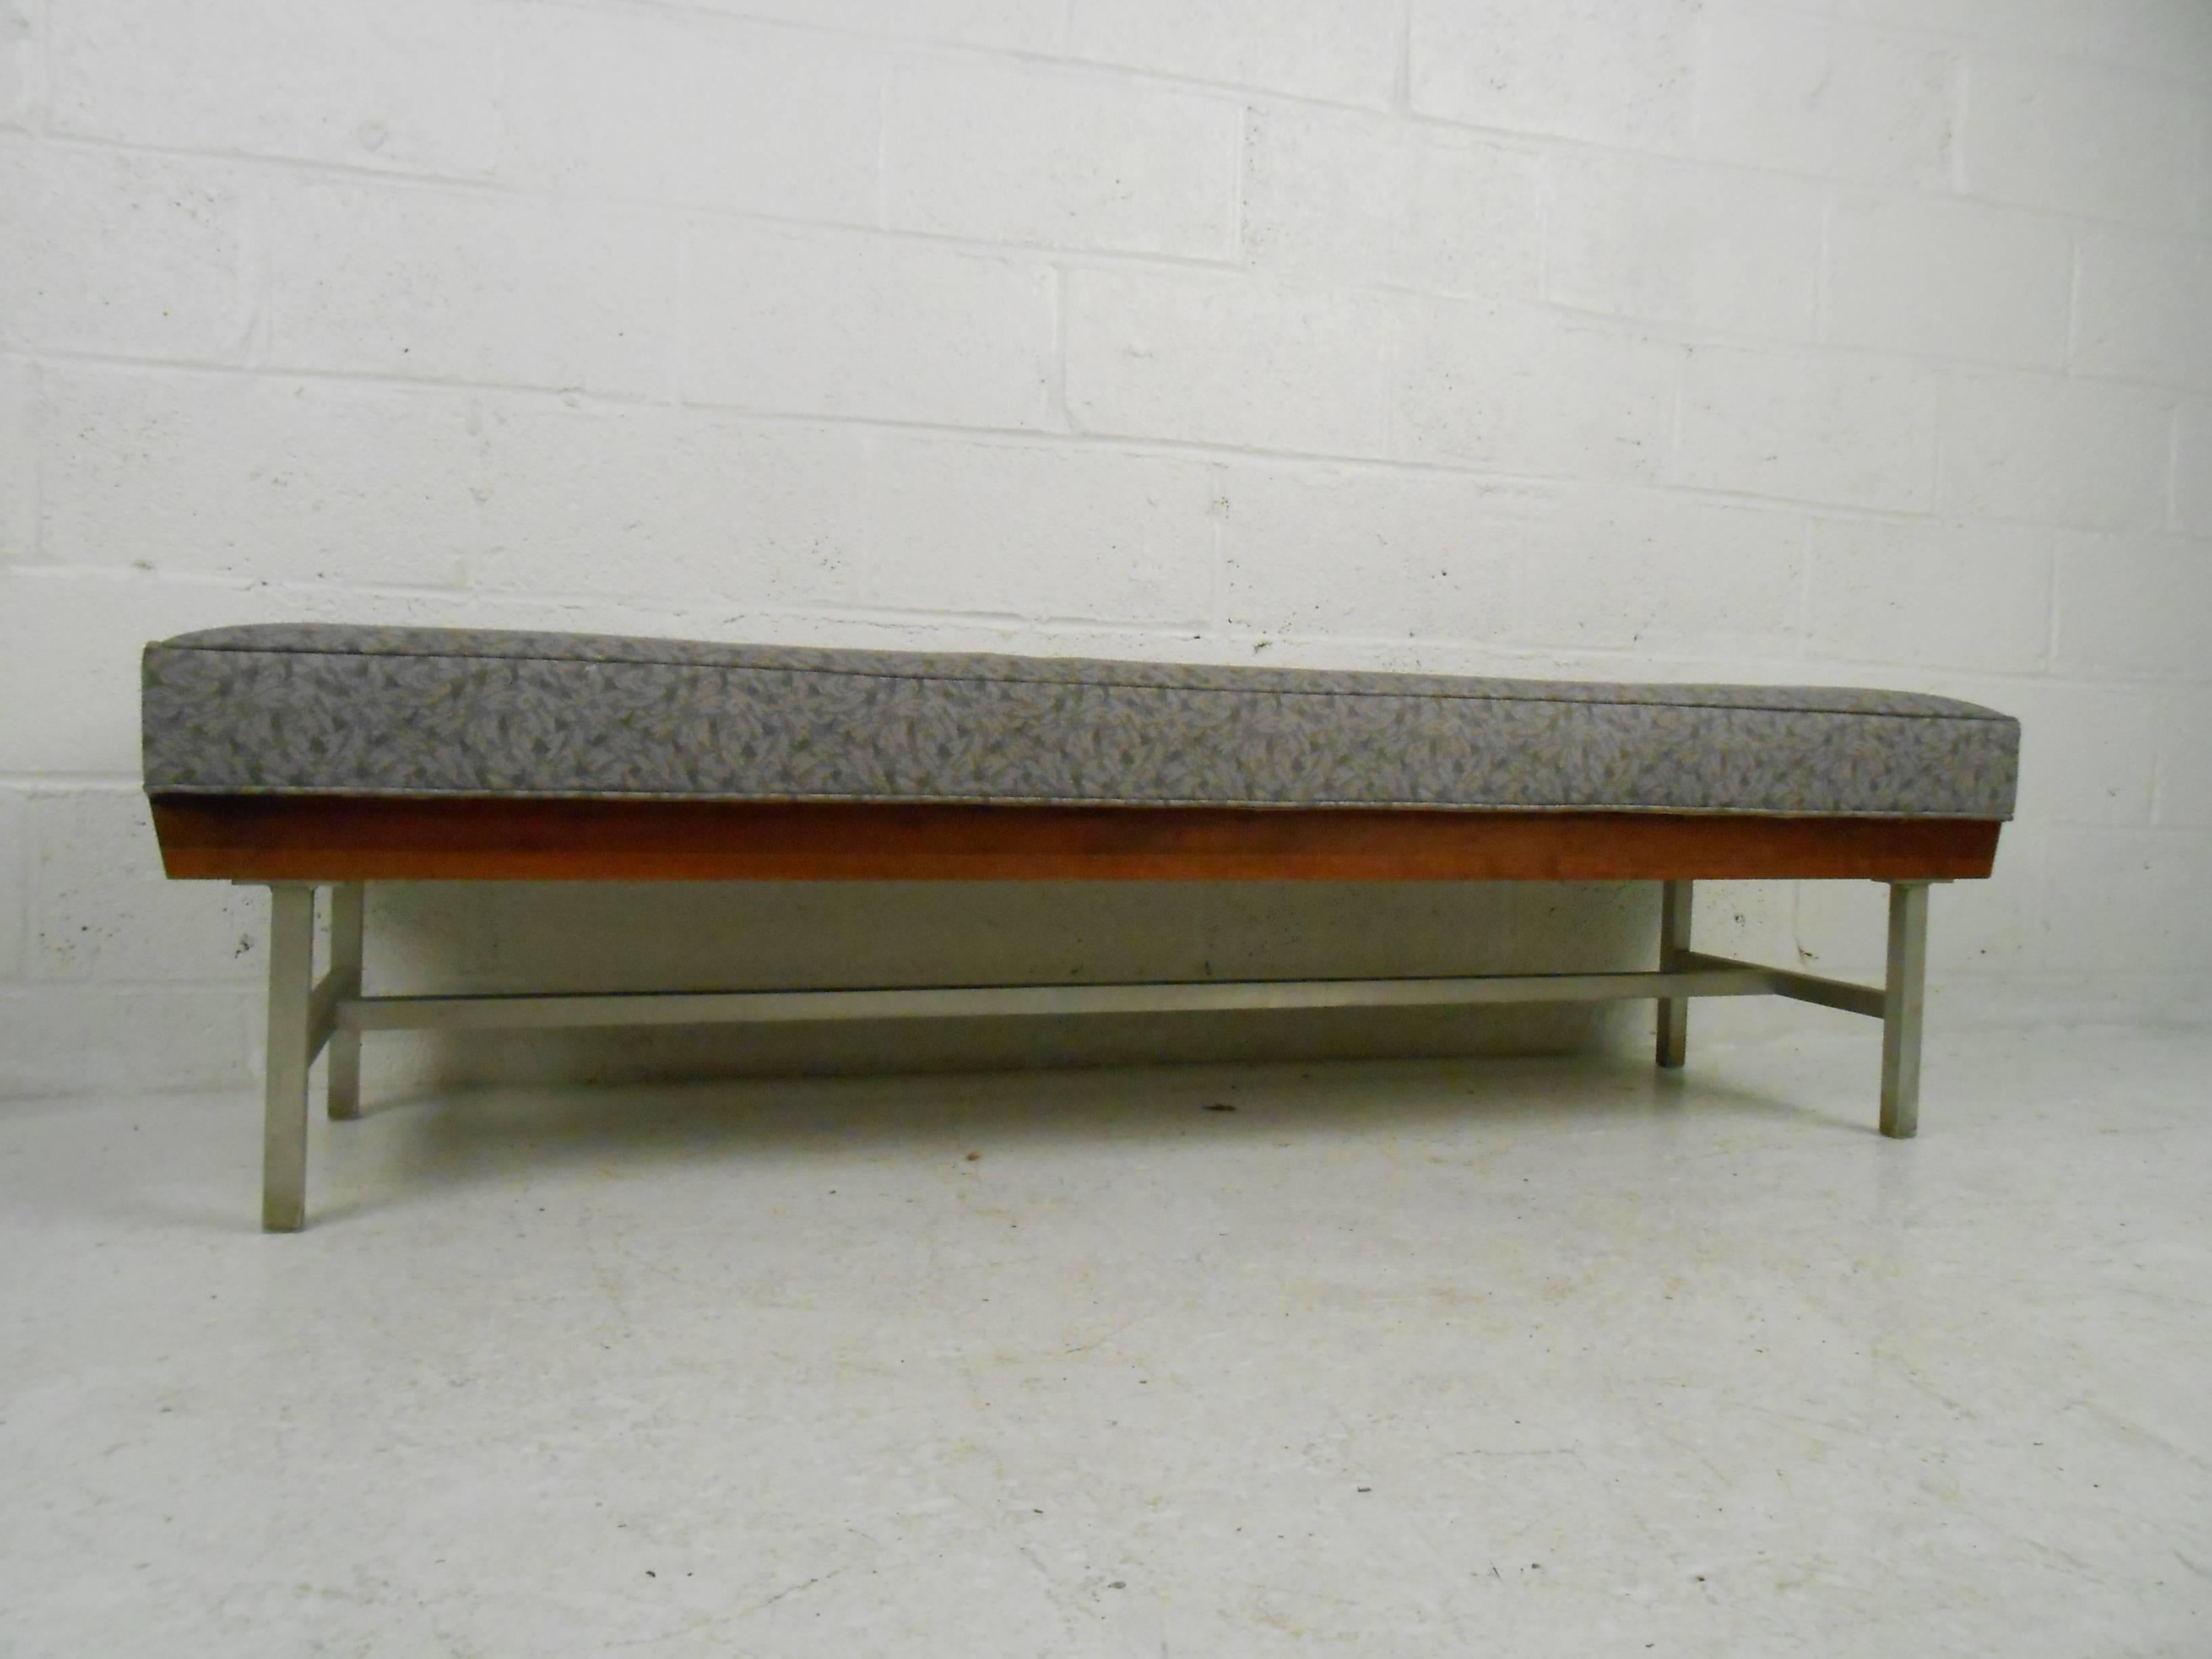 This gorgeous vintage modern bench features decorative vinyl upholstery, a wood frame, and aluminum legs. Sleek design offers comfort with its thick padded seating. This versatile midcentury piece looks incredible at the end of the bed, in the hall